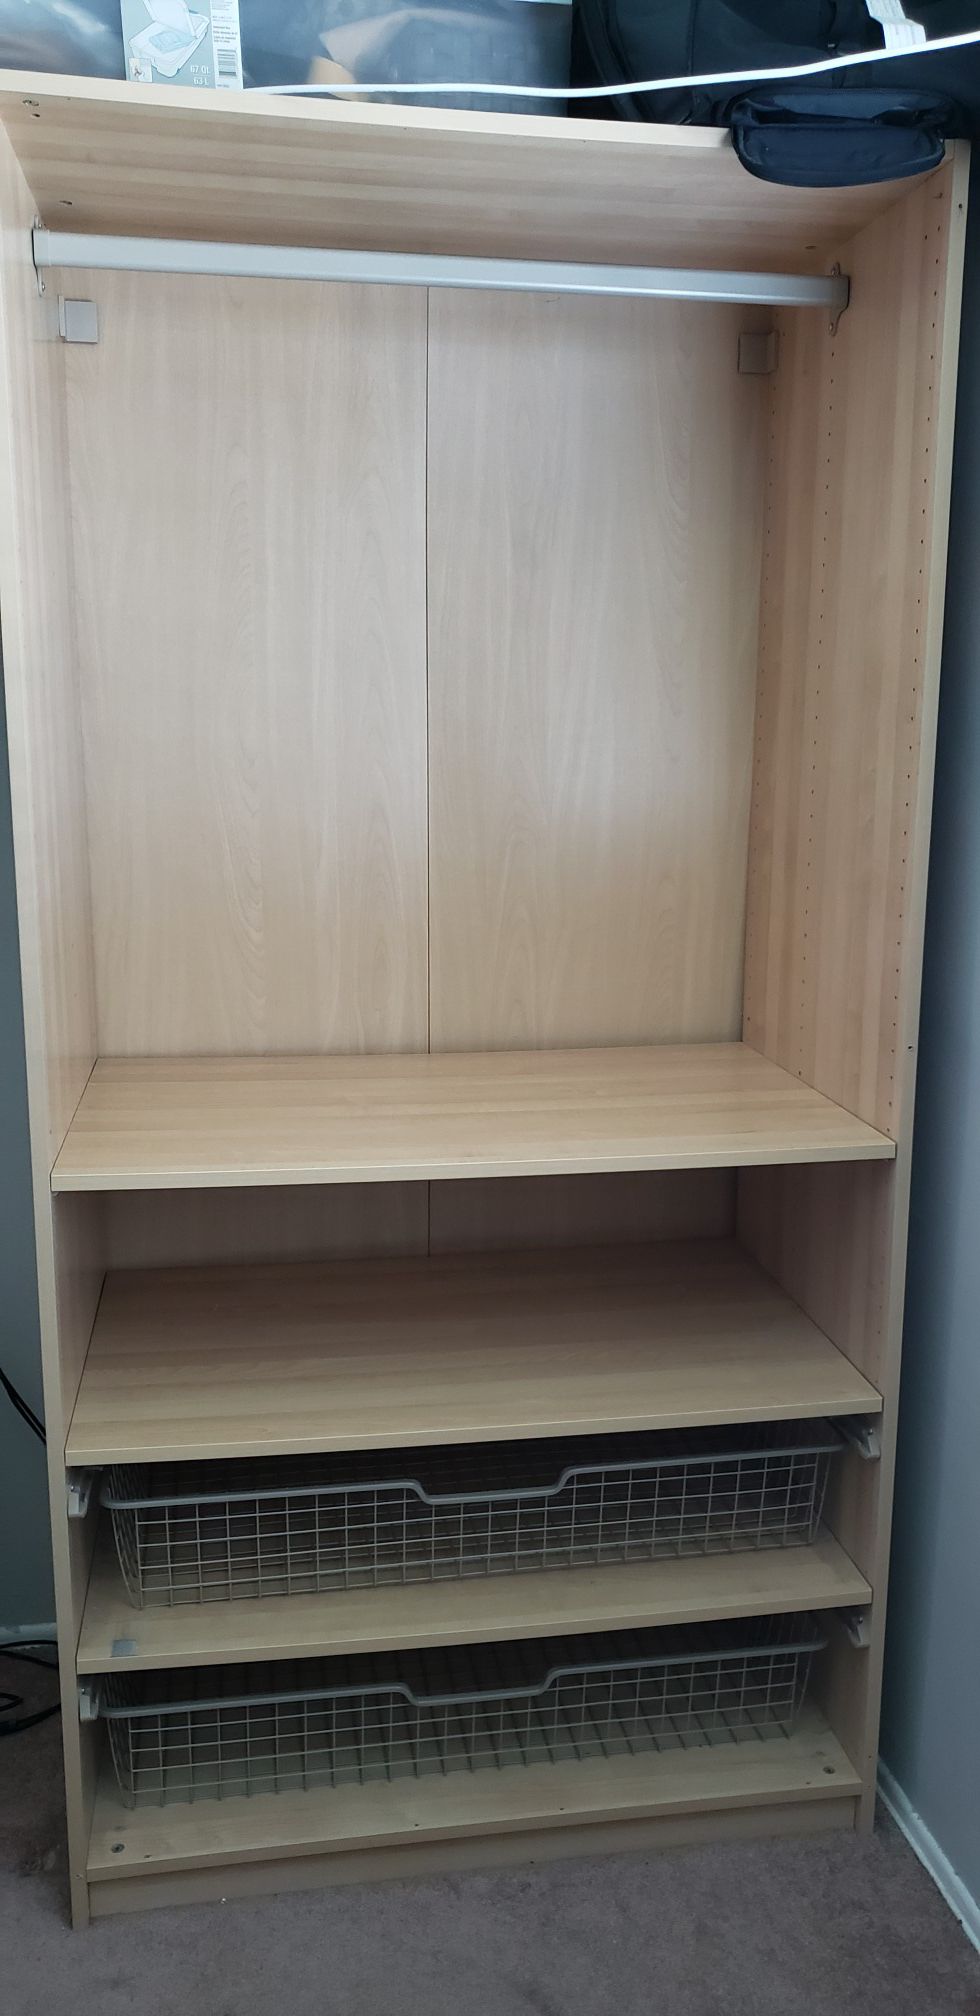 IKEA closet with wire shelves and hanging rod